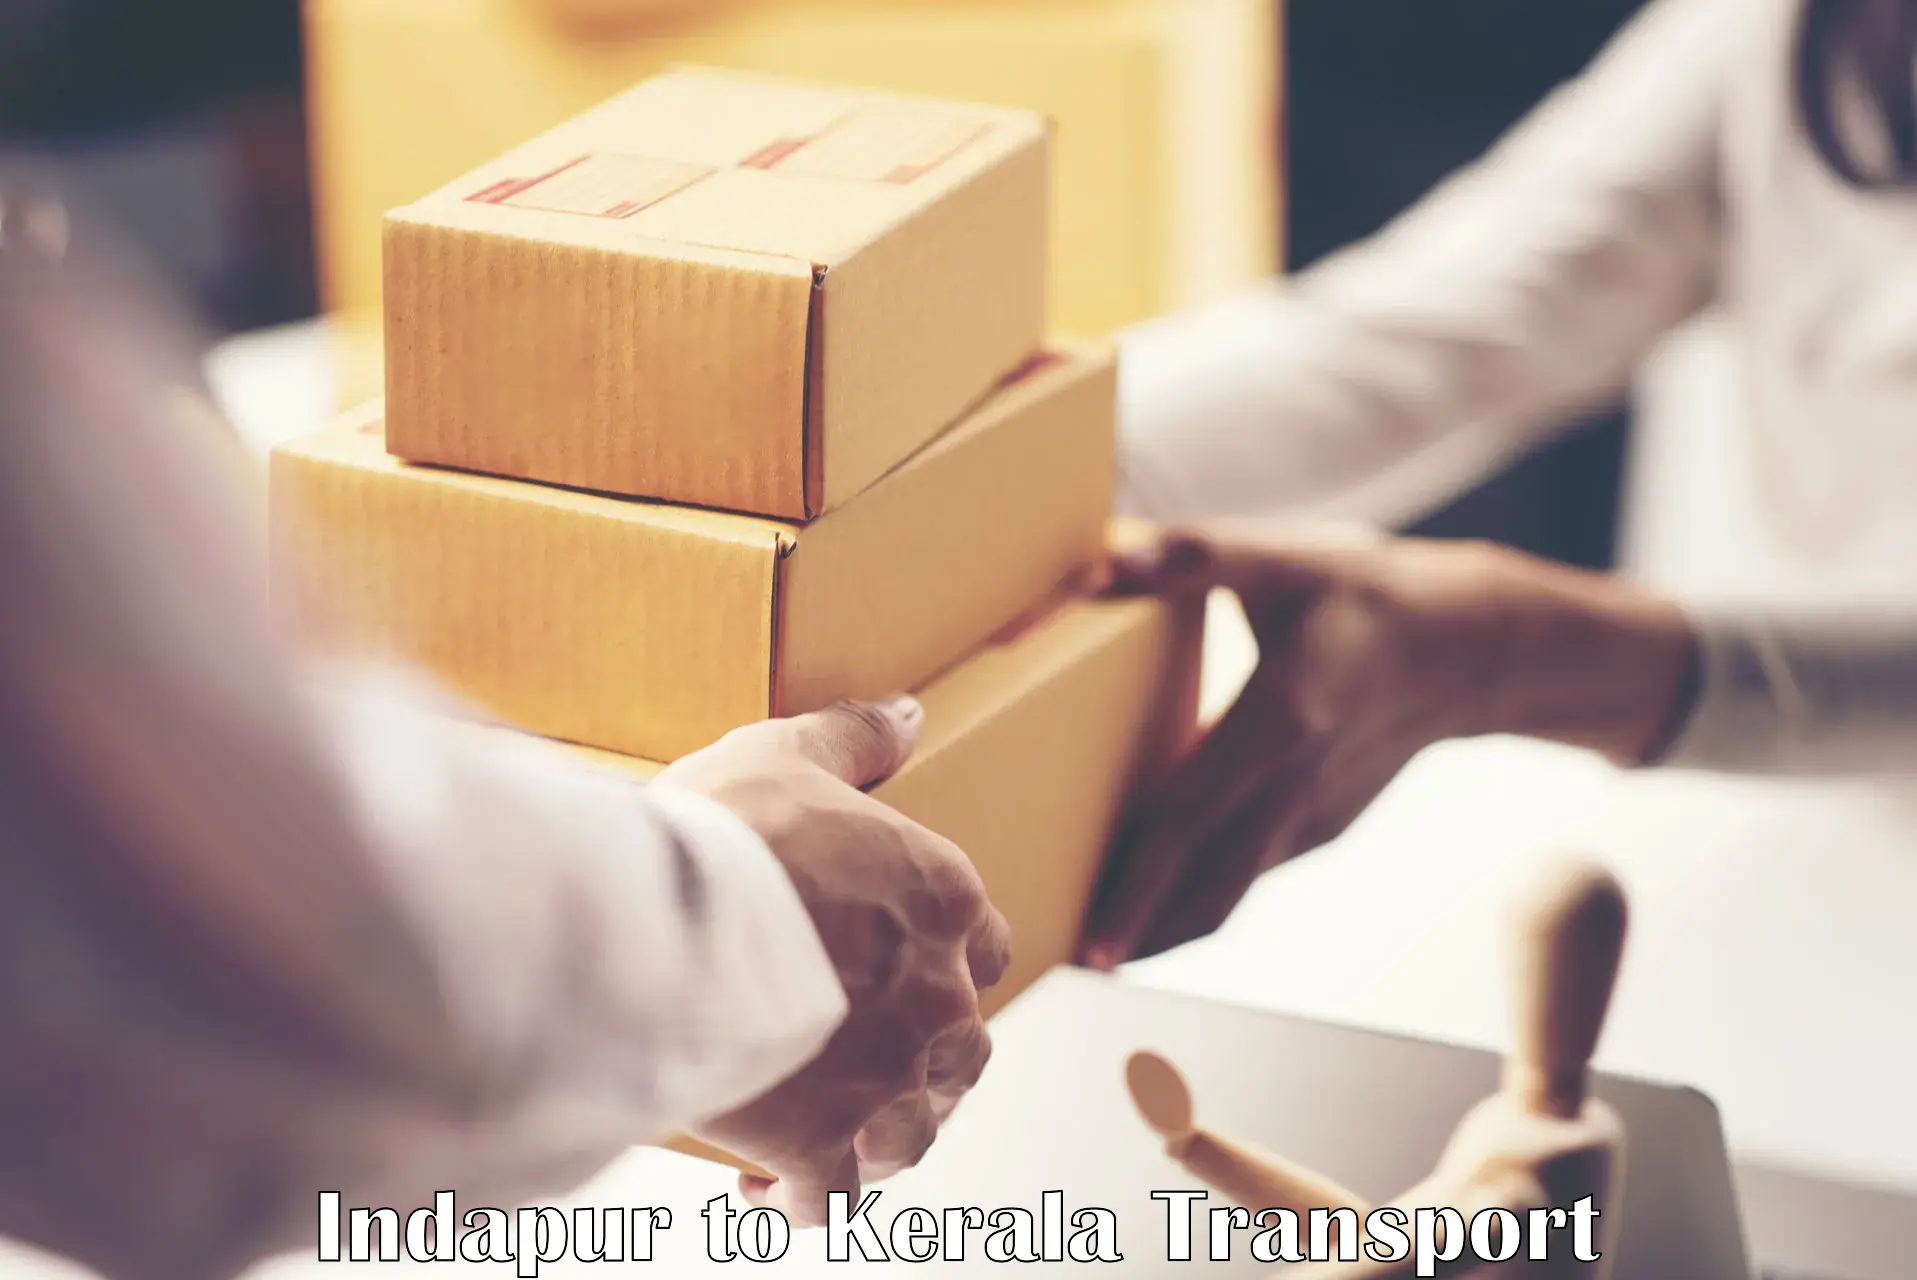 Container transportation services Indapur to Kochi